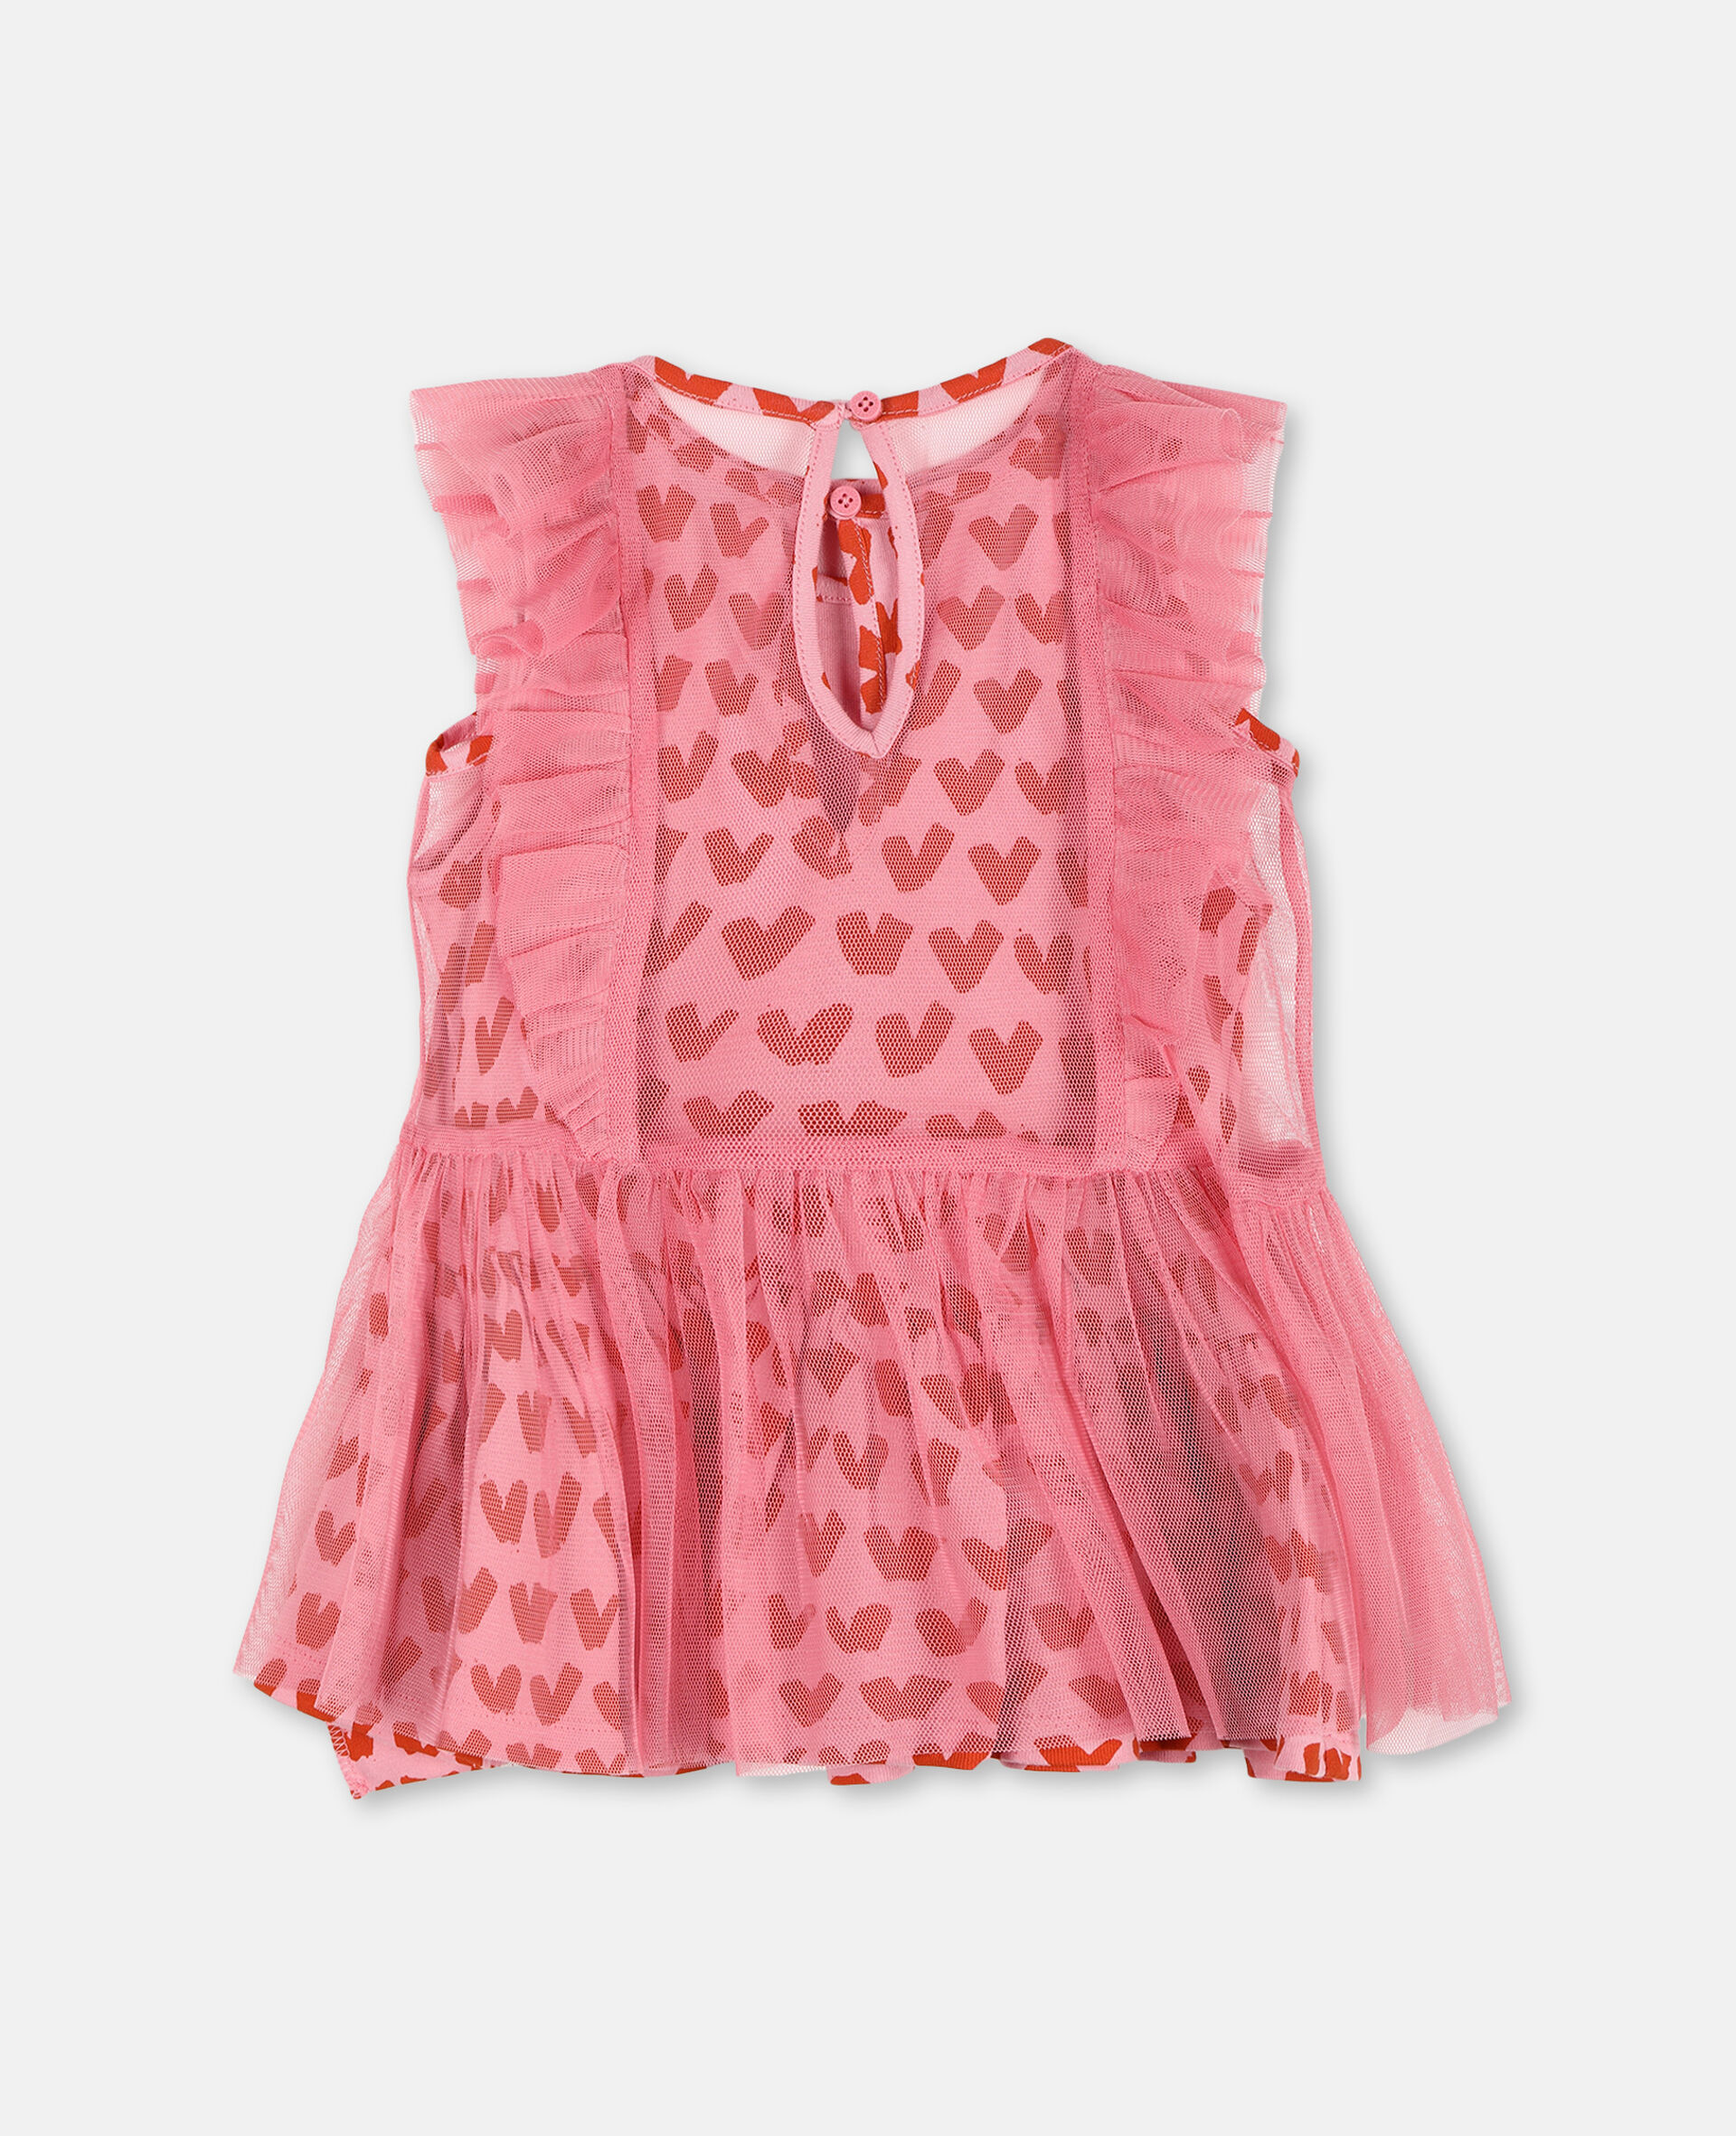 Hearts Tulle Dress-Pink-large image number 3